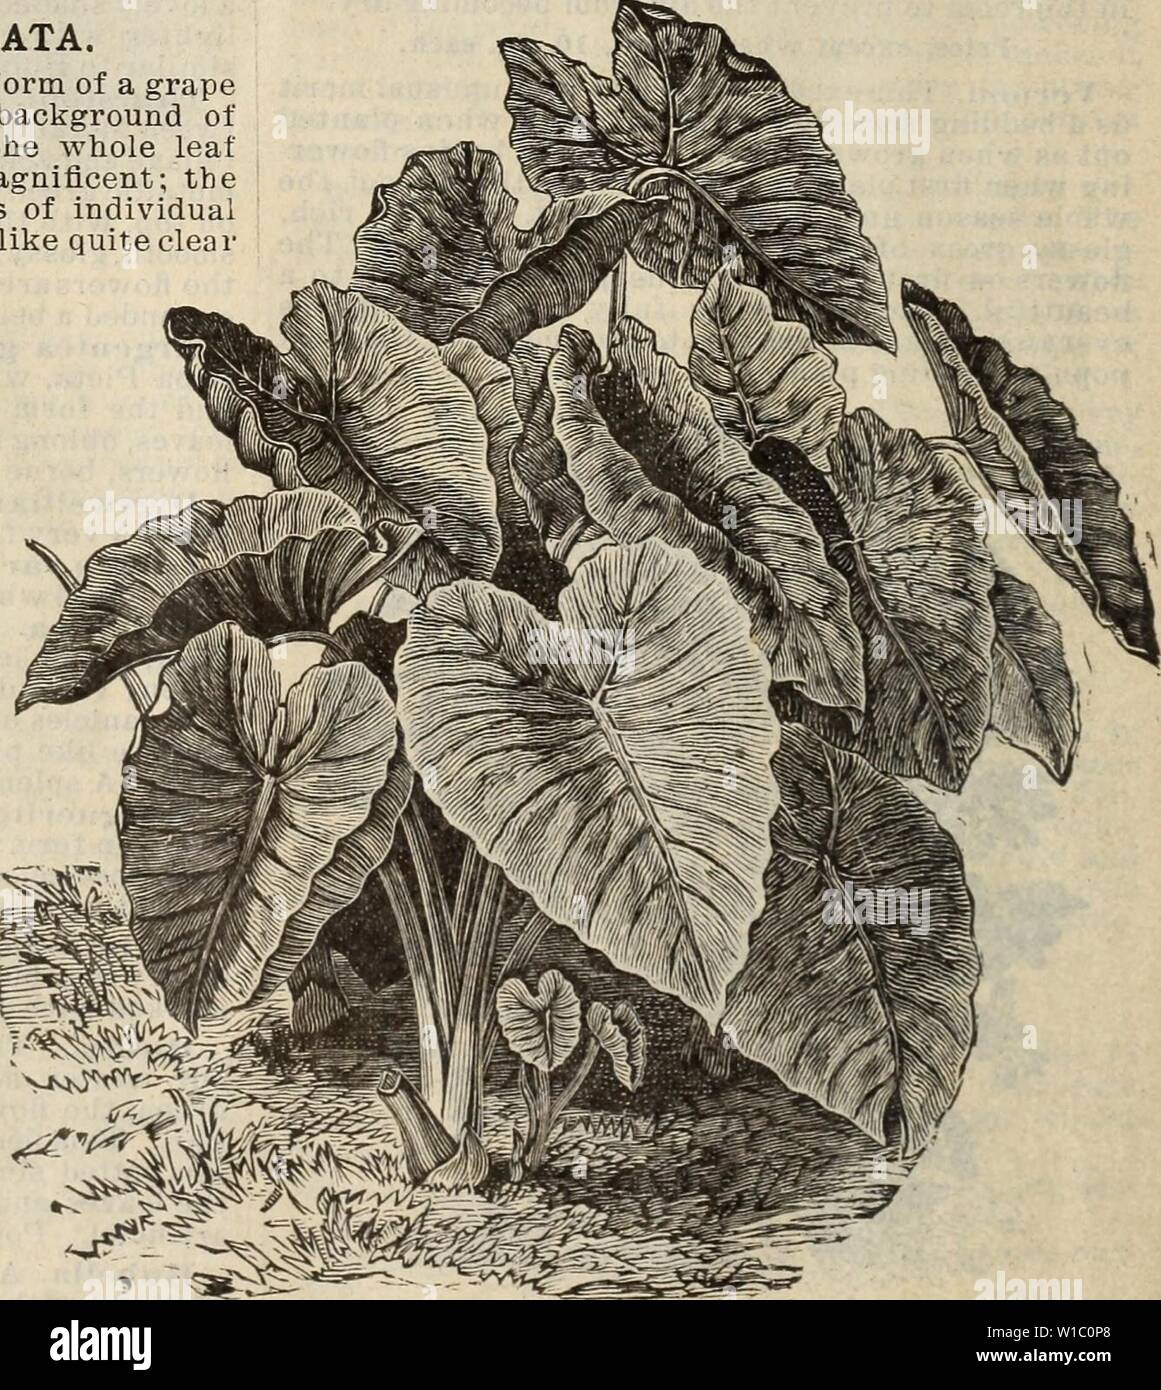 Archive image from page 49 of Descriptive catalogue  trees plants. Descriptive catalogue : trees plants seeds. . descriptivecatal1896bake Year: 1896  BEGONIA REX. BEGONIAS, continued. Schmidtii. A new variety, with bronze-colored leaves; of dwarf, dense growth, with a profusion of rosy white flowers. Weltoniensis. Exceedingly fine, of shrubby habit, with strong green leaves and bright crimson stems ; flowers waxen pink, very profuse in winter and sum- mer; a desirable sort; stands the sun well. Washingtoniana alba. Immense panicles of pure white flowers and fine glossy leaves; good win- ter bl Stock Photo